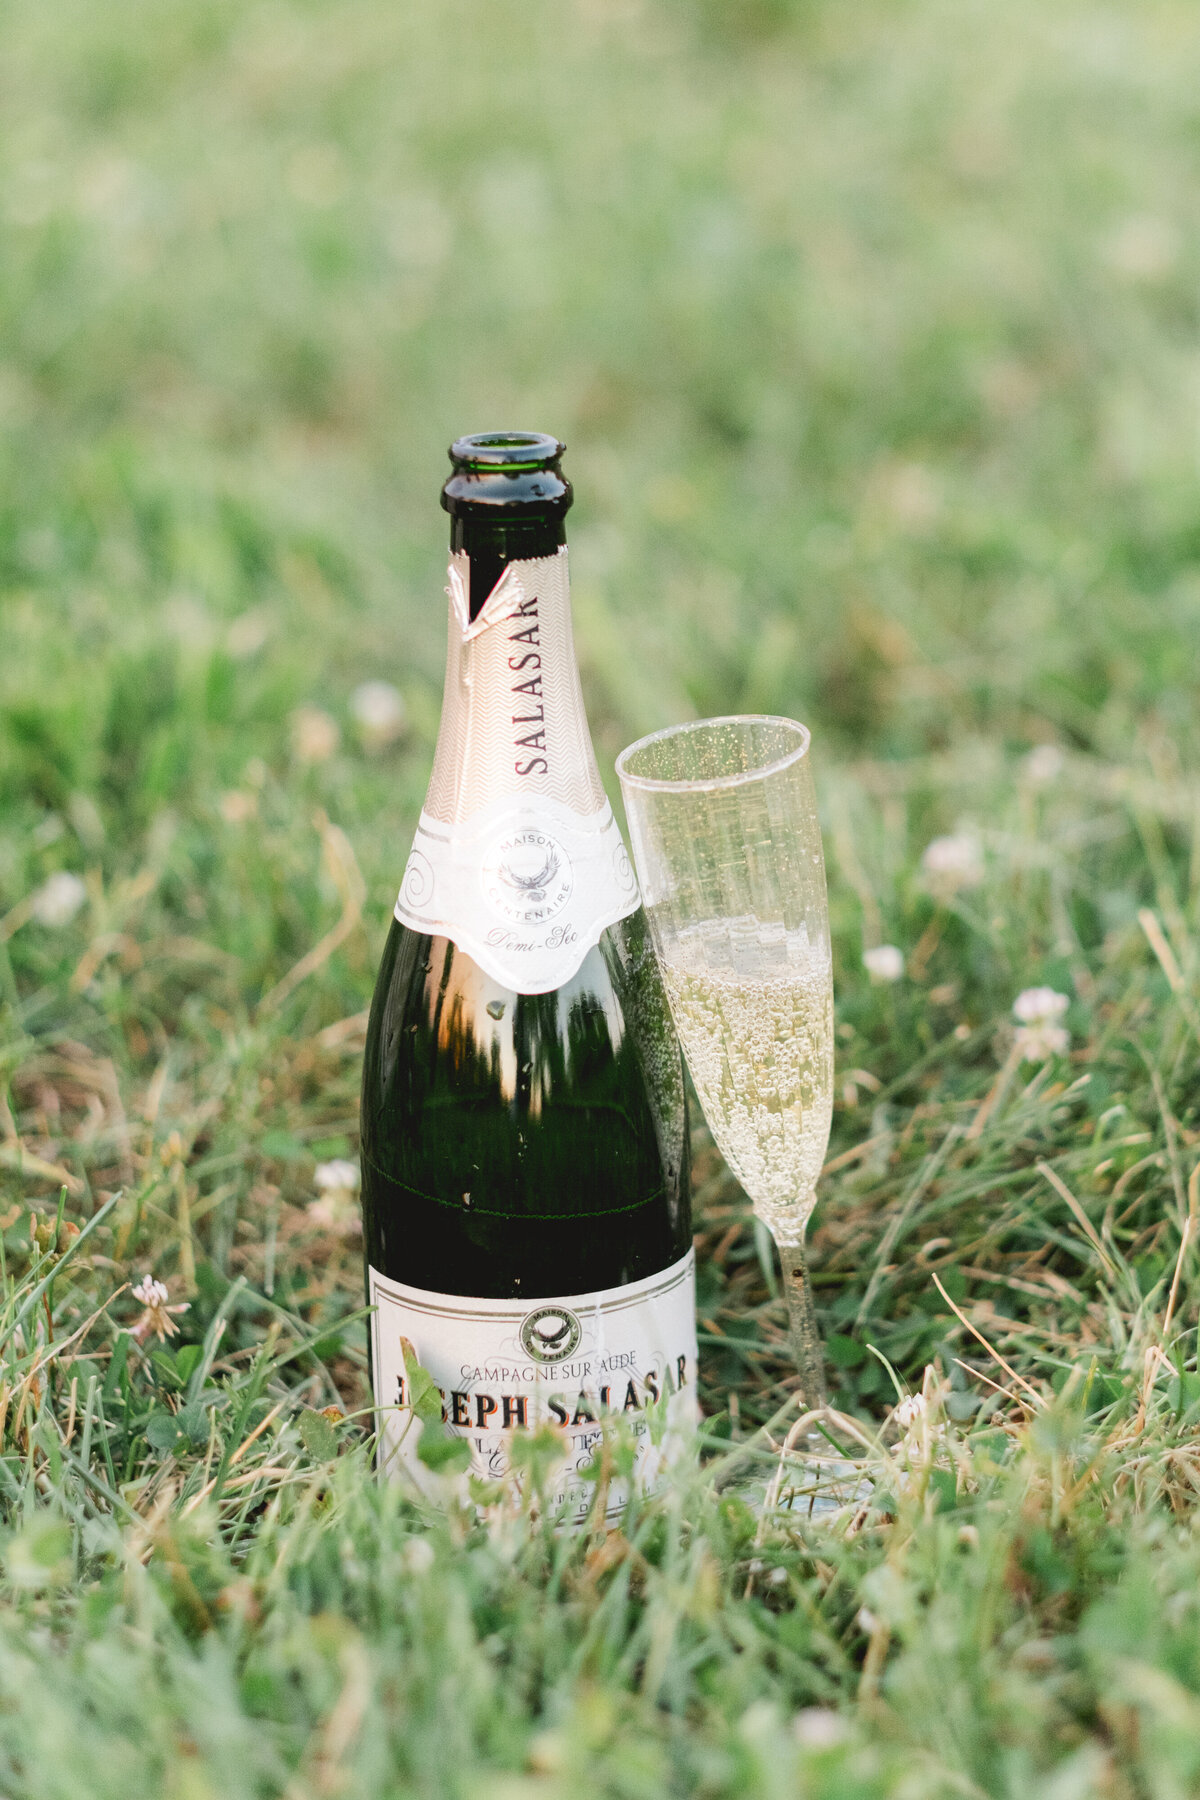 opened champagne bottle and champagne glass nestled in the grass